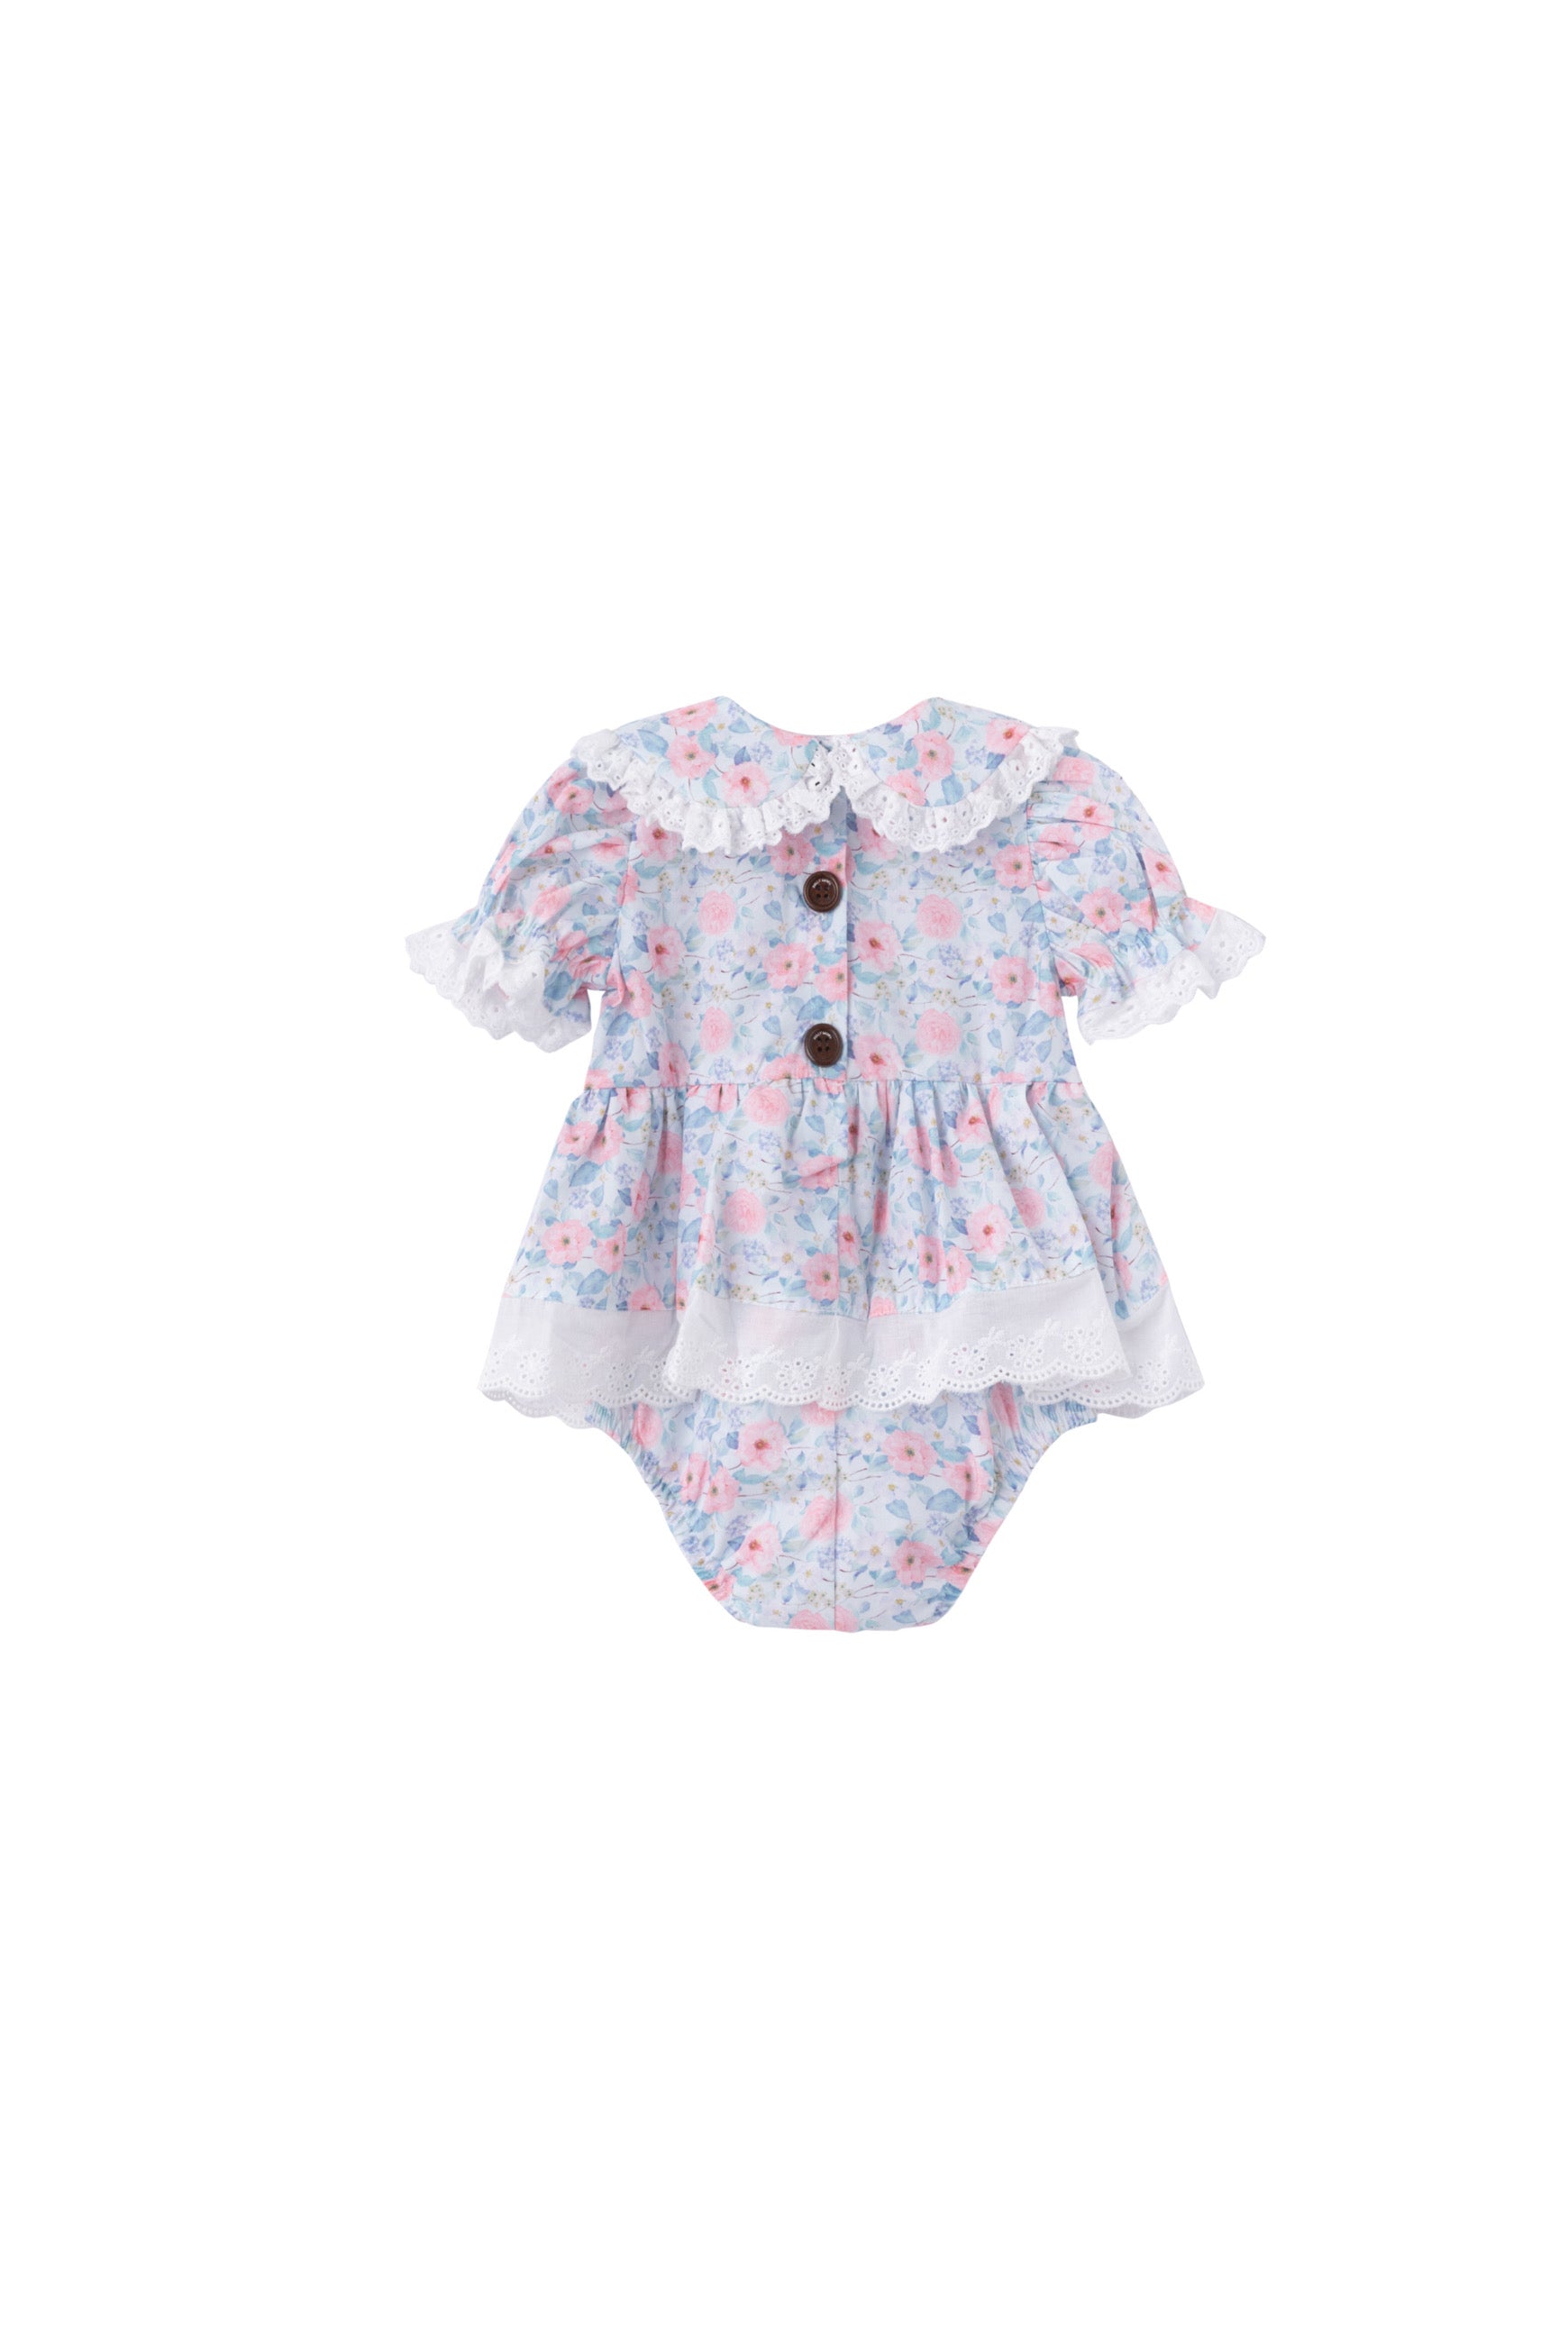 Frilly dolly romper